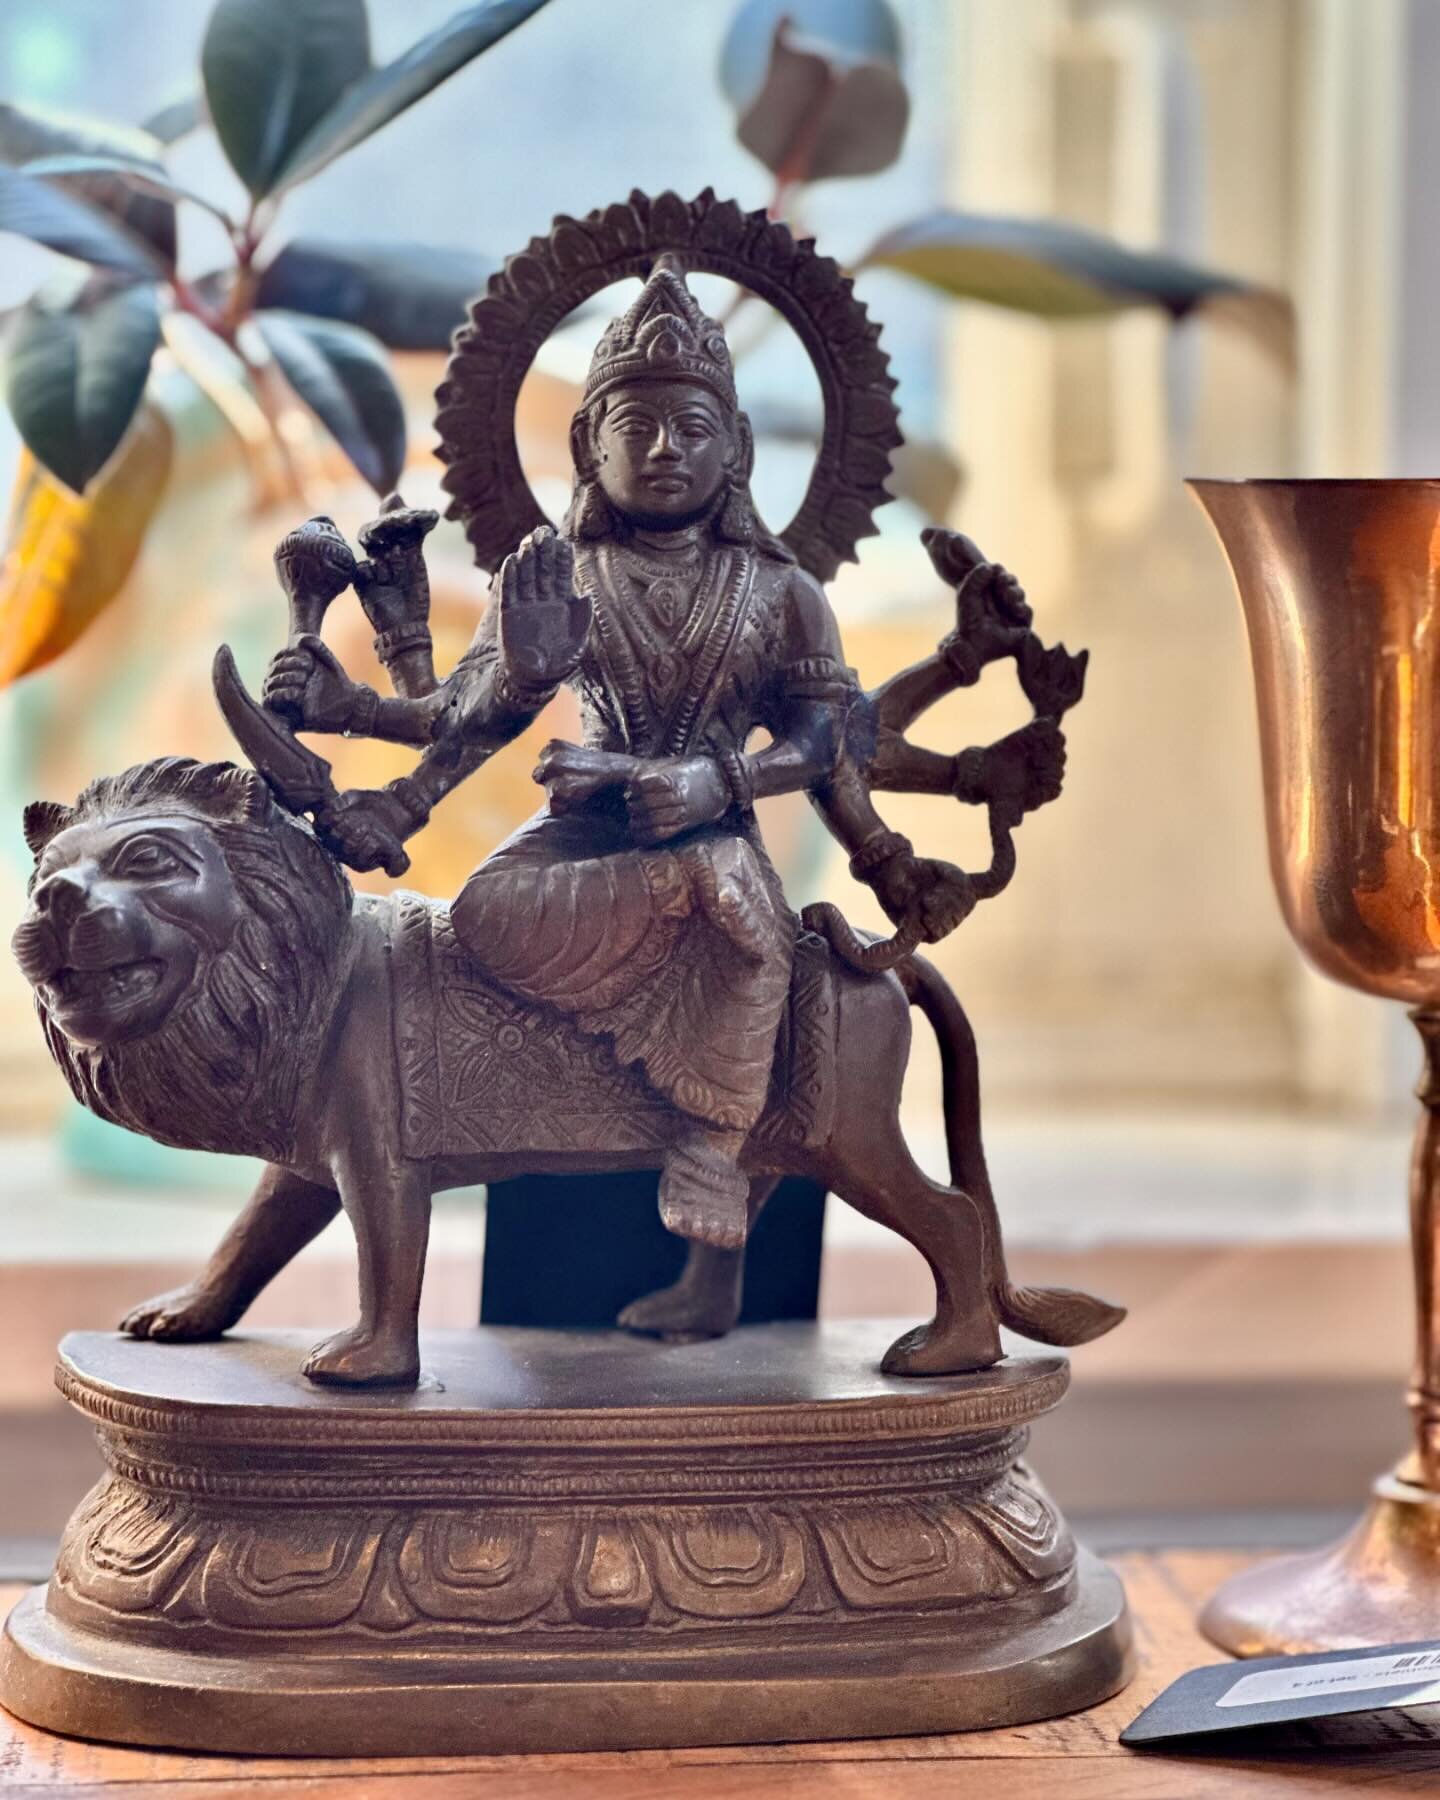 A few more of the INCREDIBLE, one of a kind, Bronze Statues Kory @kory_sheffer brought back from her recent trip to India 🇮🇳 

If you&rsquo;re a Yoga teacher or studio owner, practitioner or collector, these statues would make a beautiful addition 